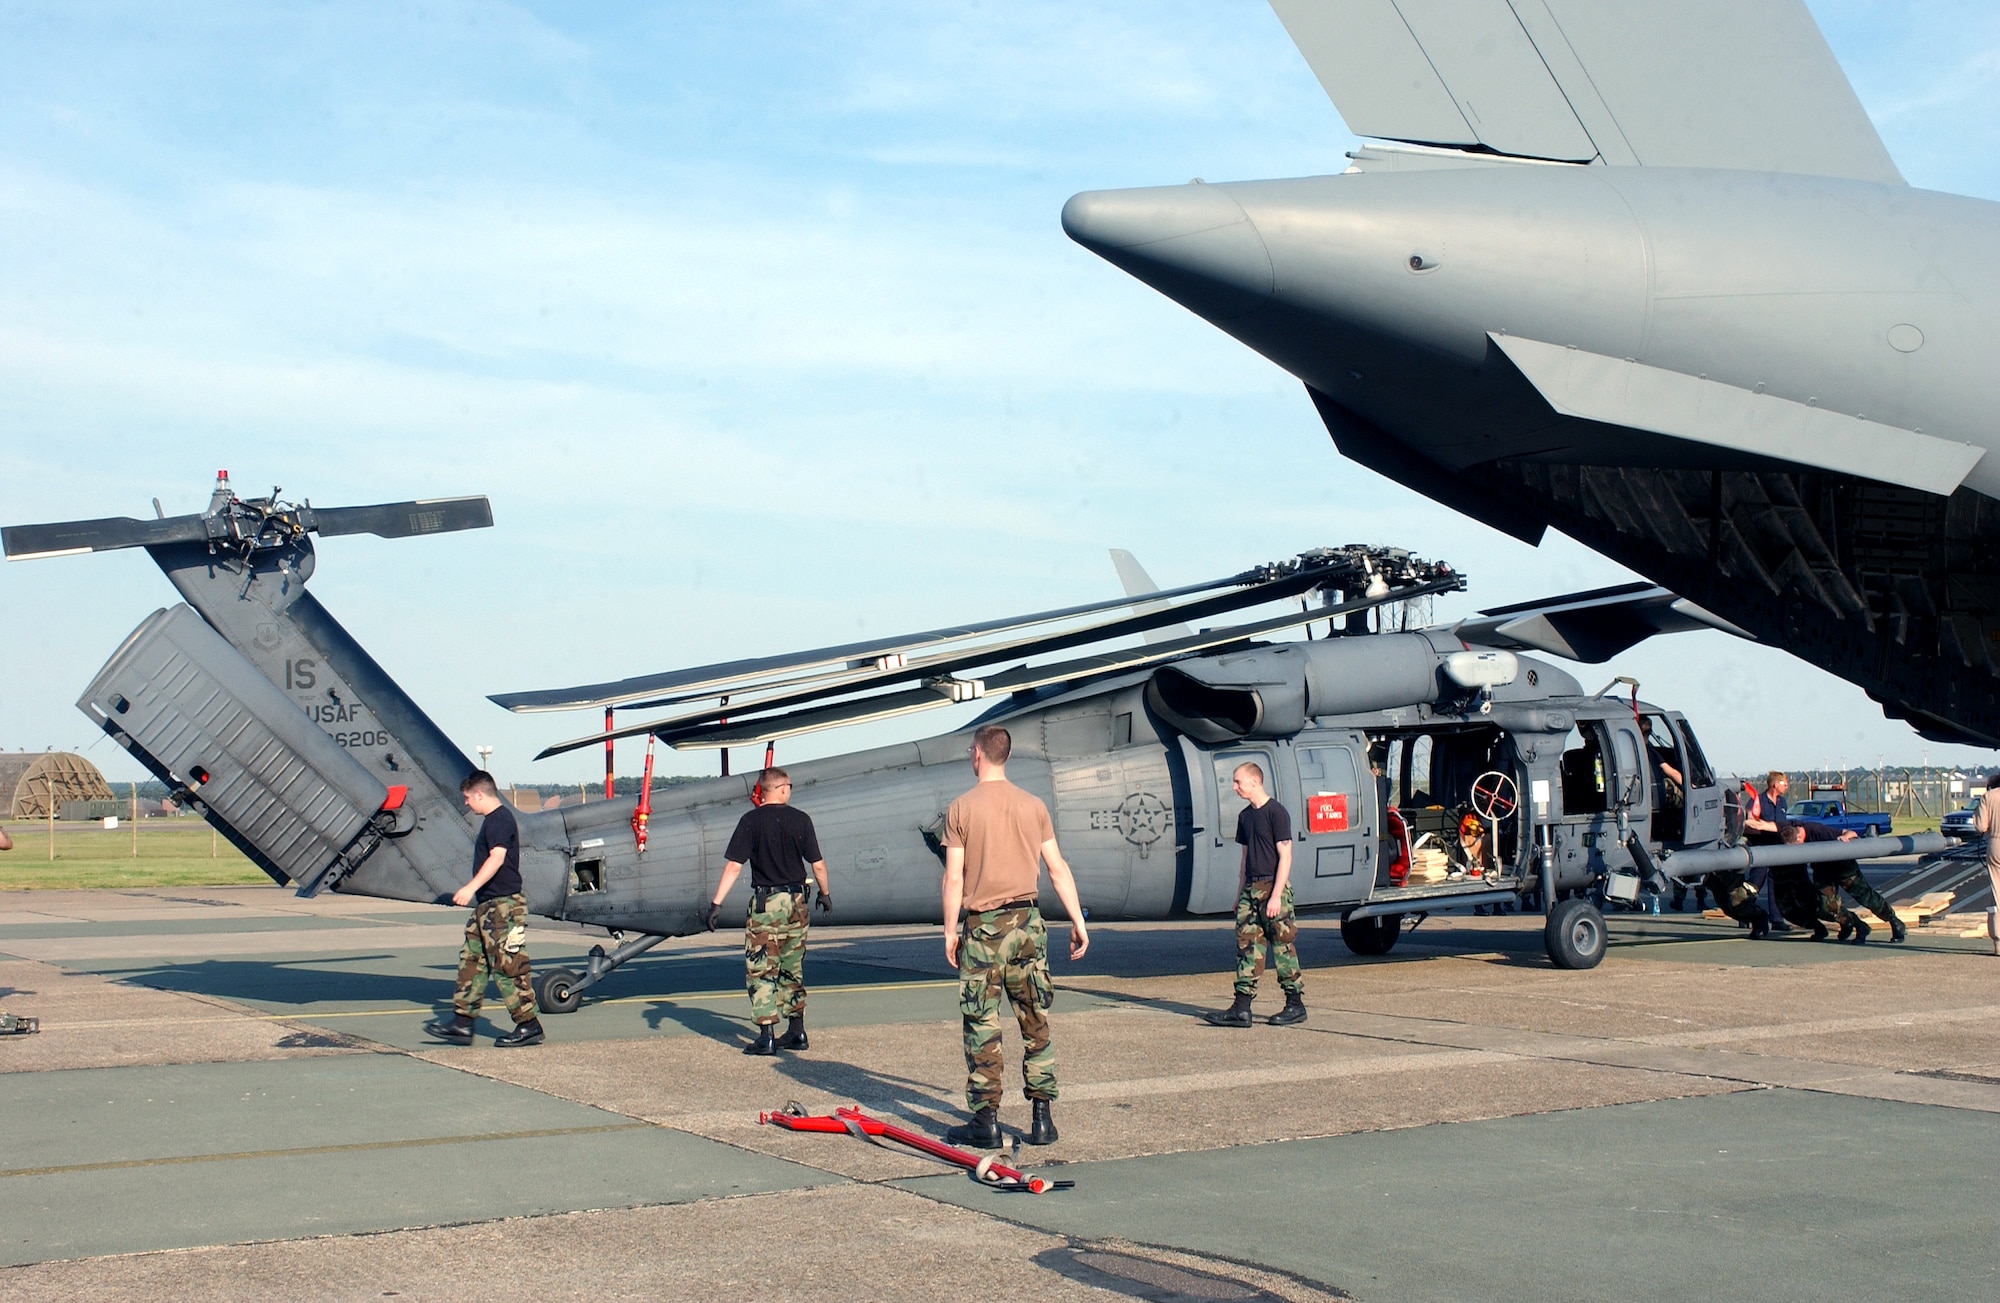 Airmen help unload an HH-60G Pave Hawk helicopter from a C-17 Globemaster III at Royal Air Force Lakenheath, England, on Monday, June 12. The helicopters are being reassigned to RAF Lakenheath from Naval Air Station Keflavik, Iceland. (U.S. Air Force photo)
